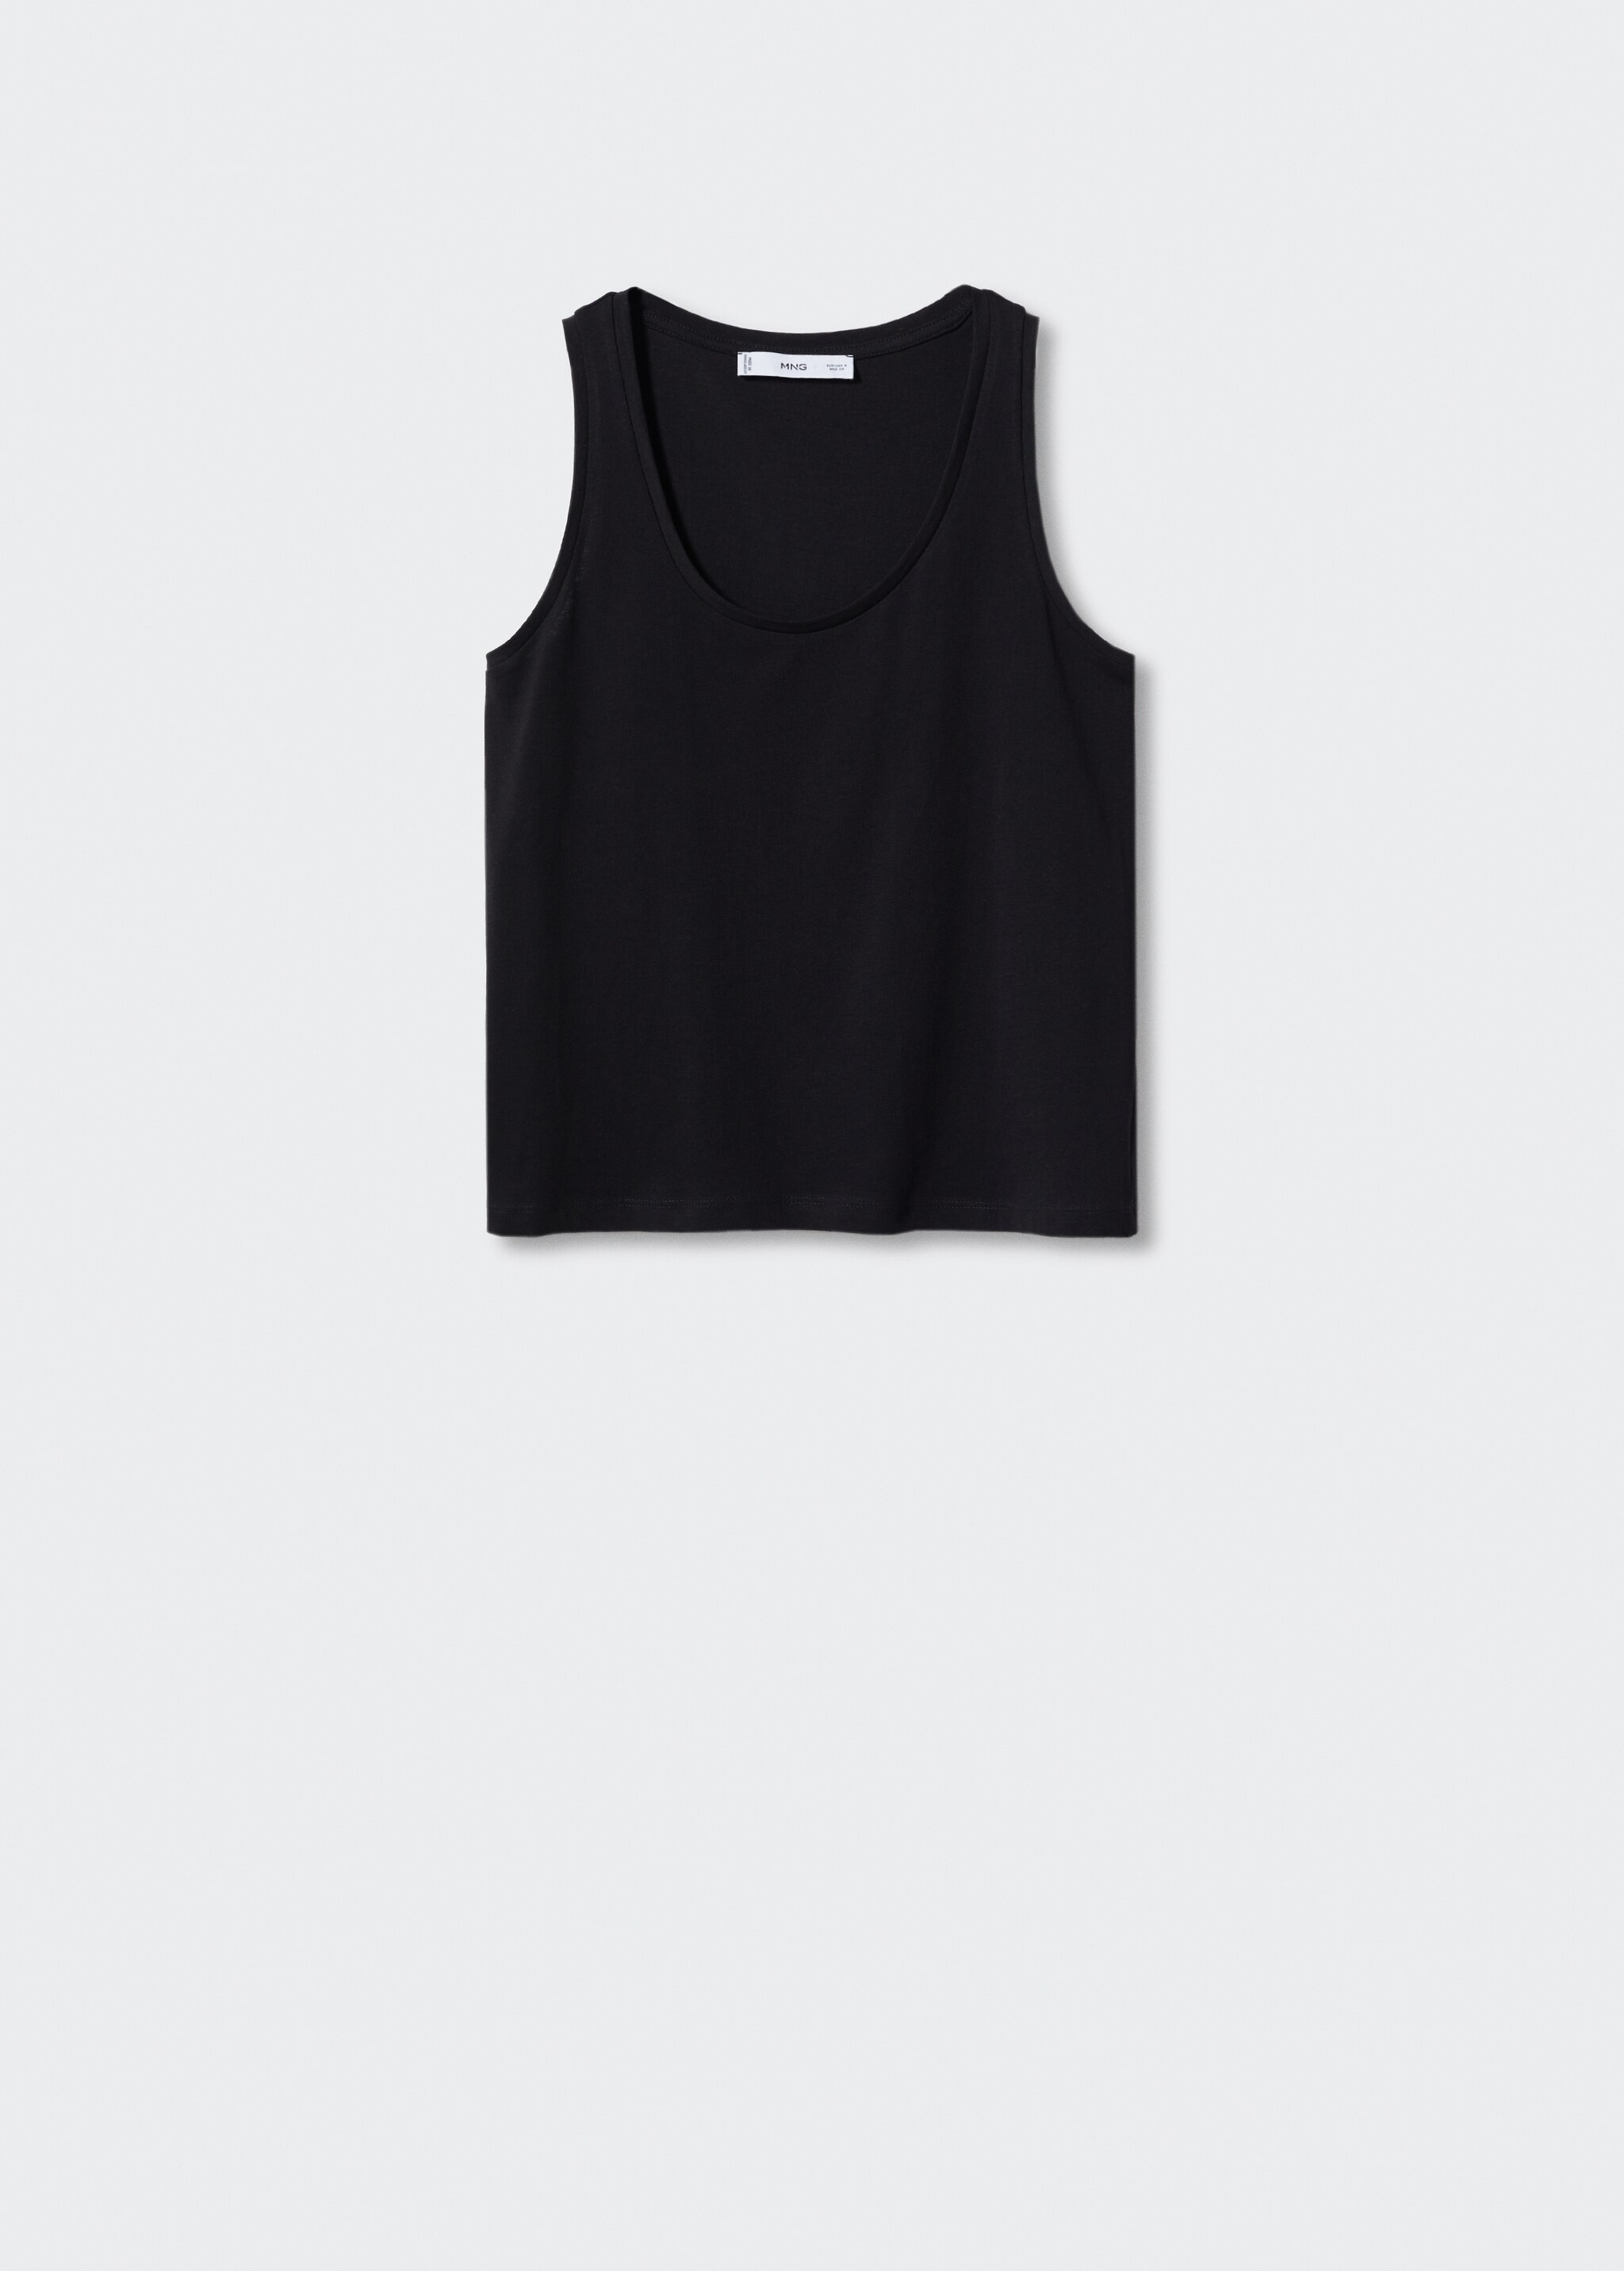 Cotton tank top - Article without model